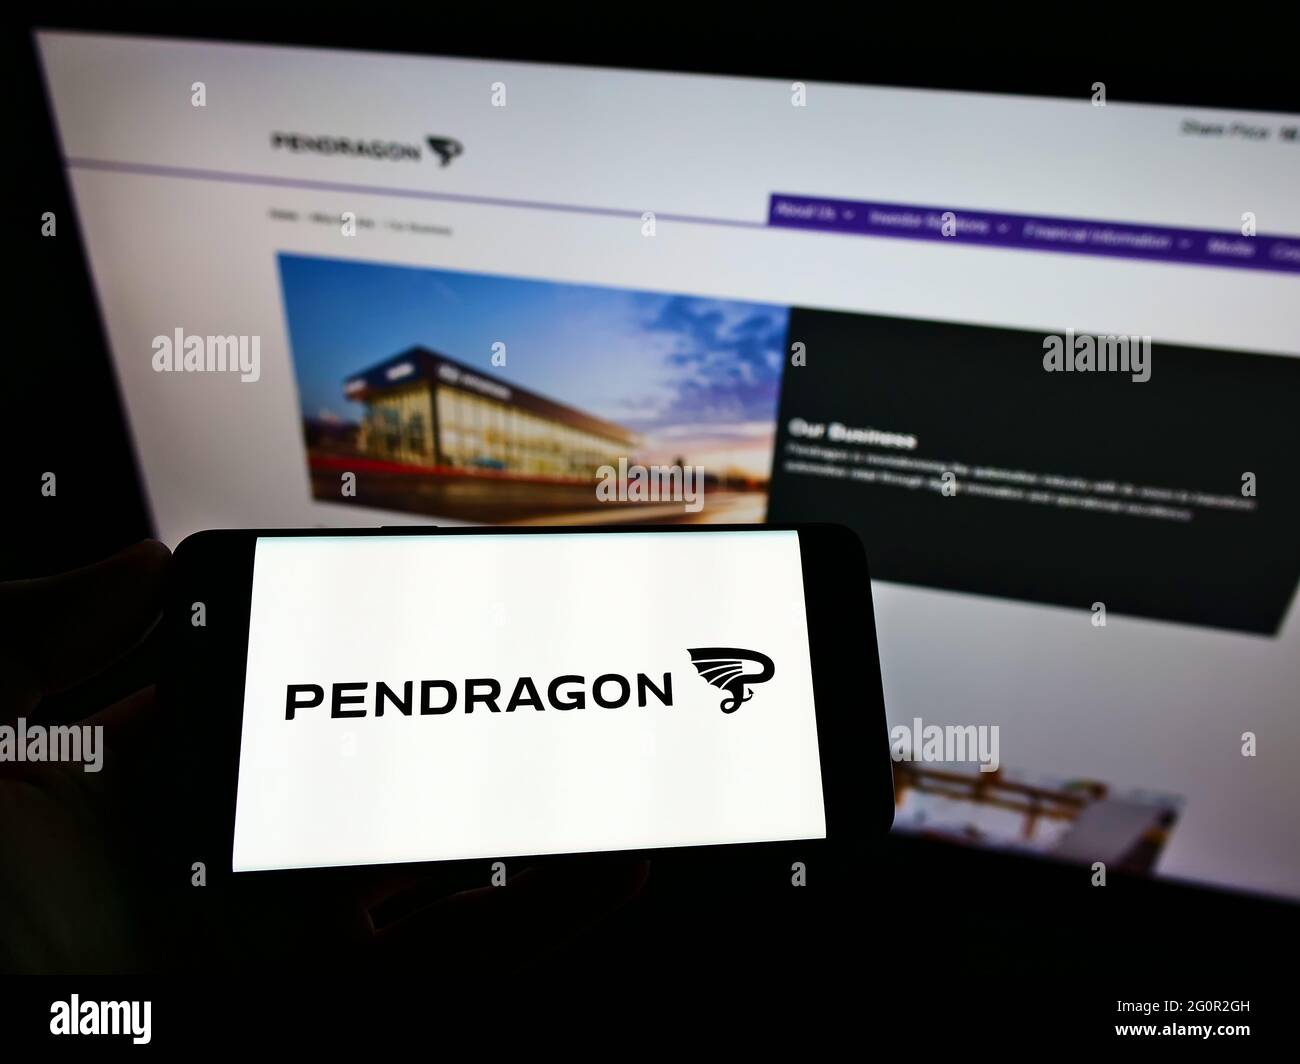 Person holding mobile phone with logo of British automotive retail company Pendragon PLC on screen in front of web page. Focus on phone display. Stock Photo